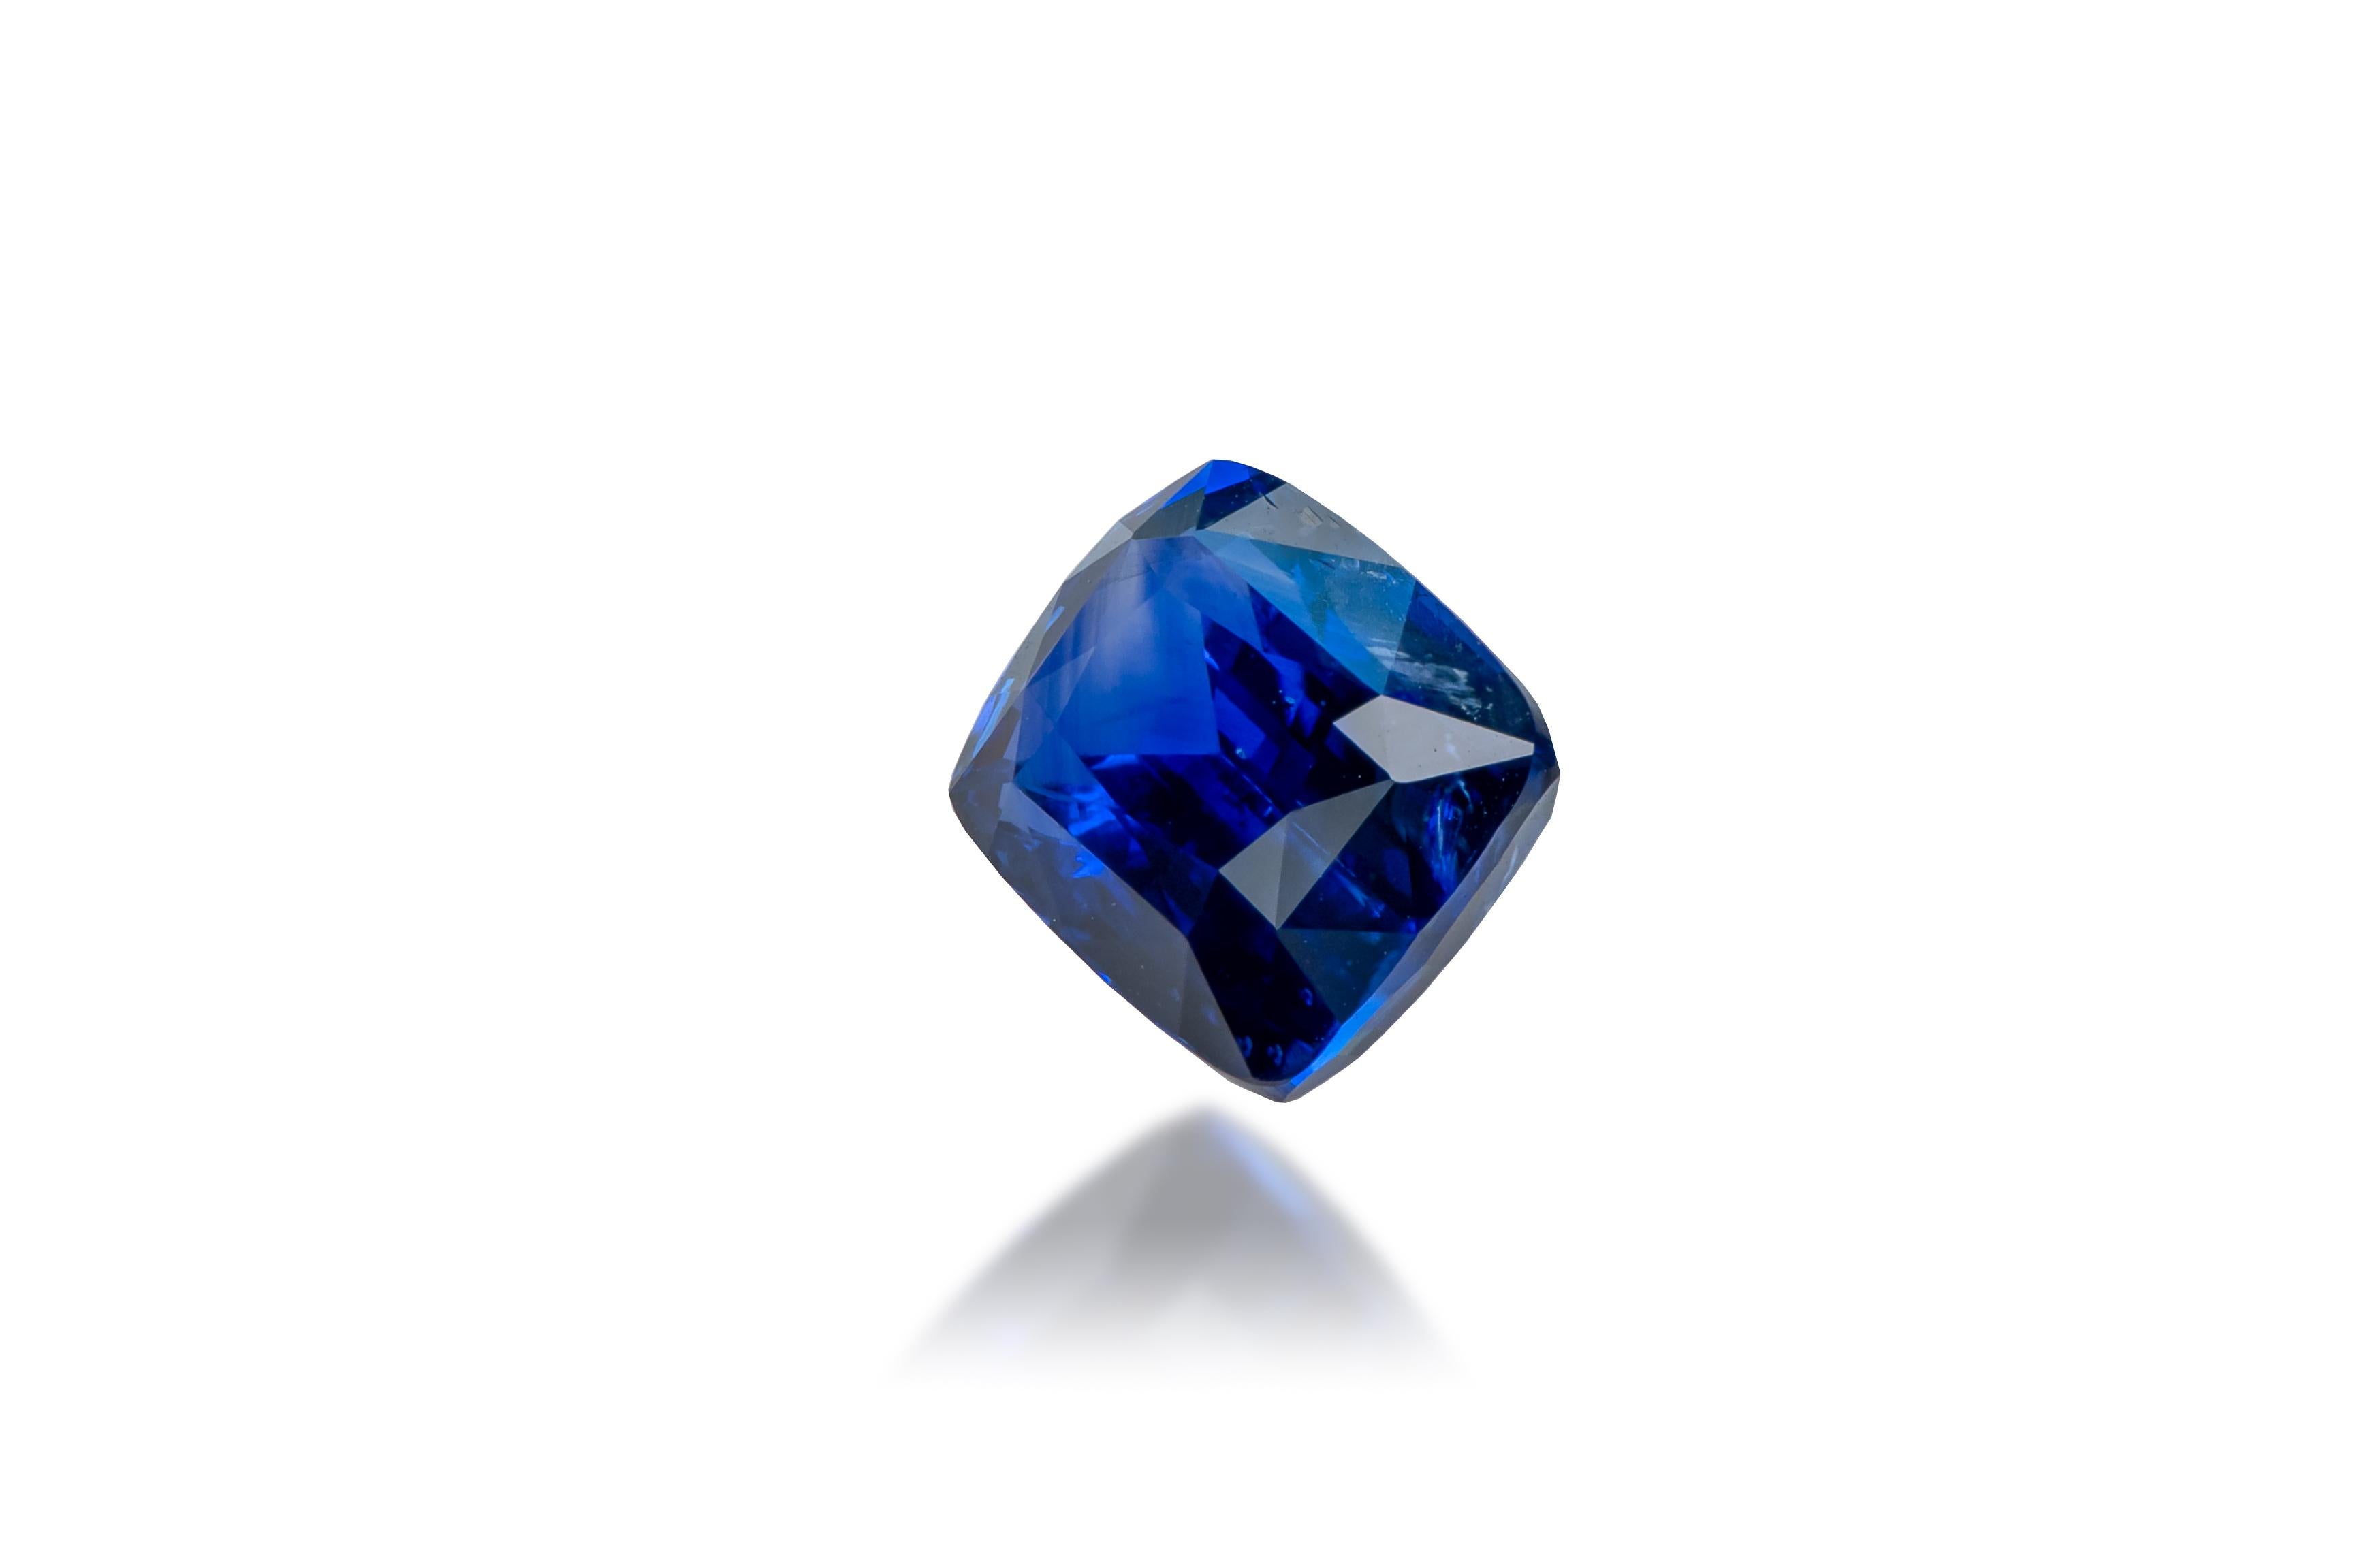 Sapphire: Vivid/Royal Blue Natural Sapphire
Origin: Sri Lanka
Shape: Cushion Cut
Carat Weight: 4.06 cts
Dimensions: 10.20 x 7.58 x 5.23 mm

This Vivid/Royal Blue Sapphire has a natural blue color and is unheated.
It is clean and nicely faceted and